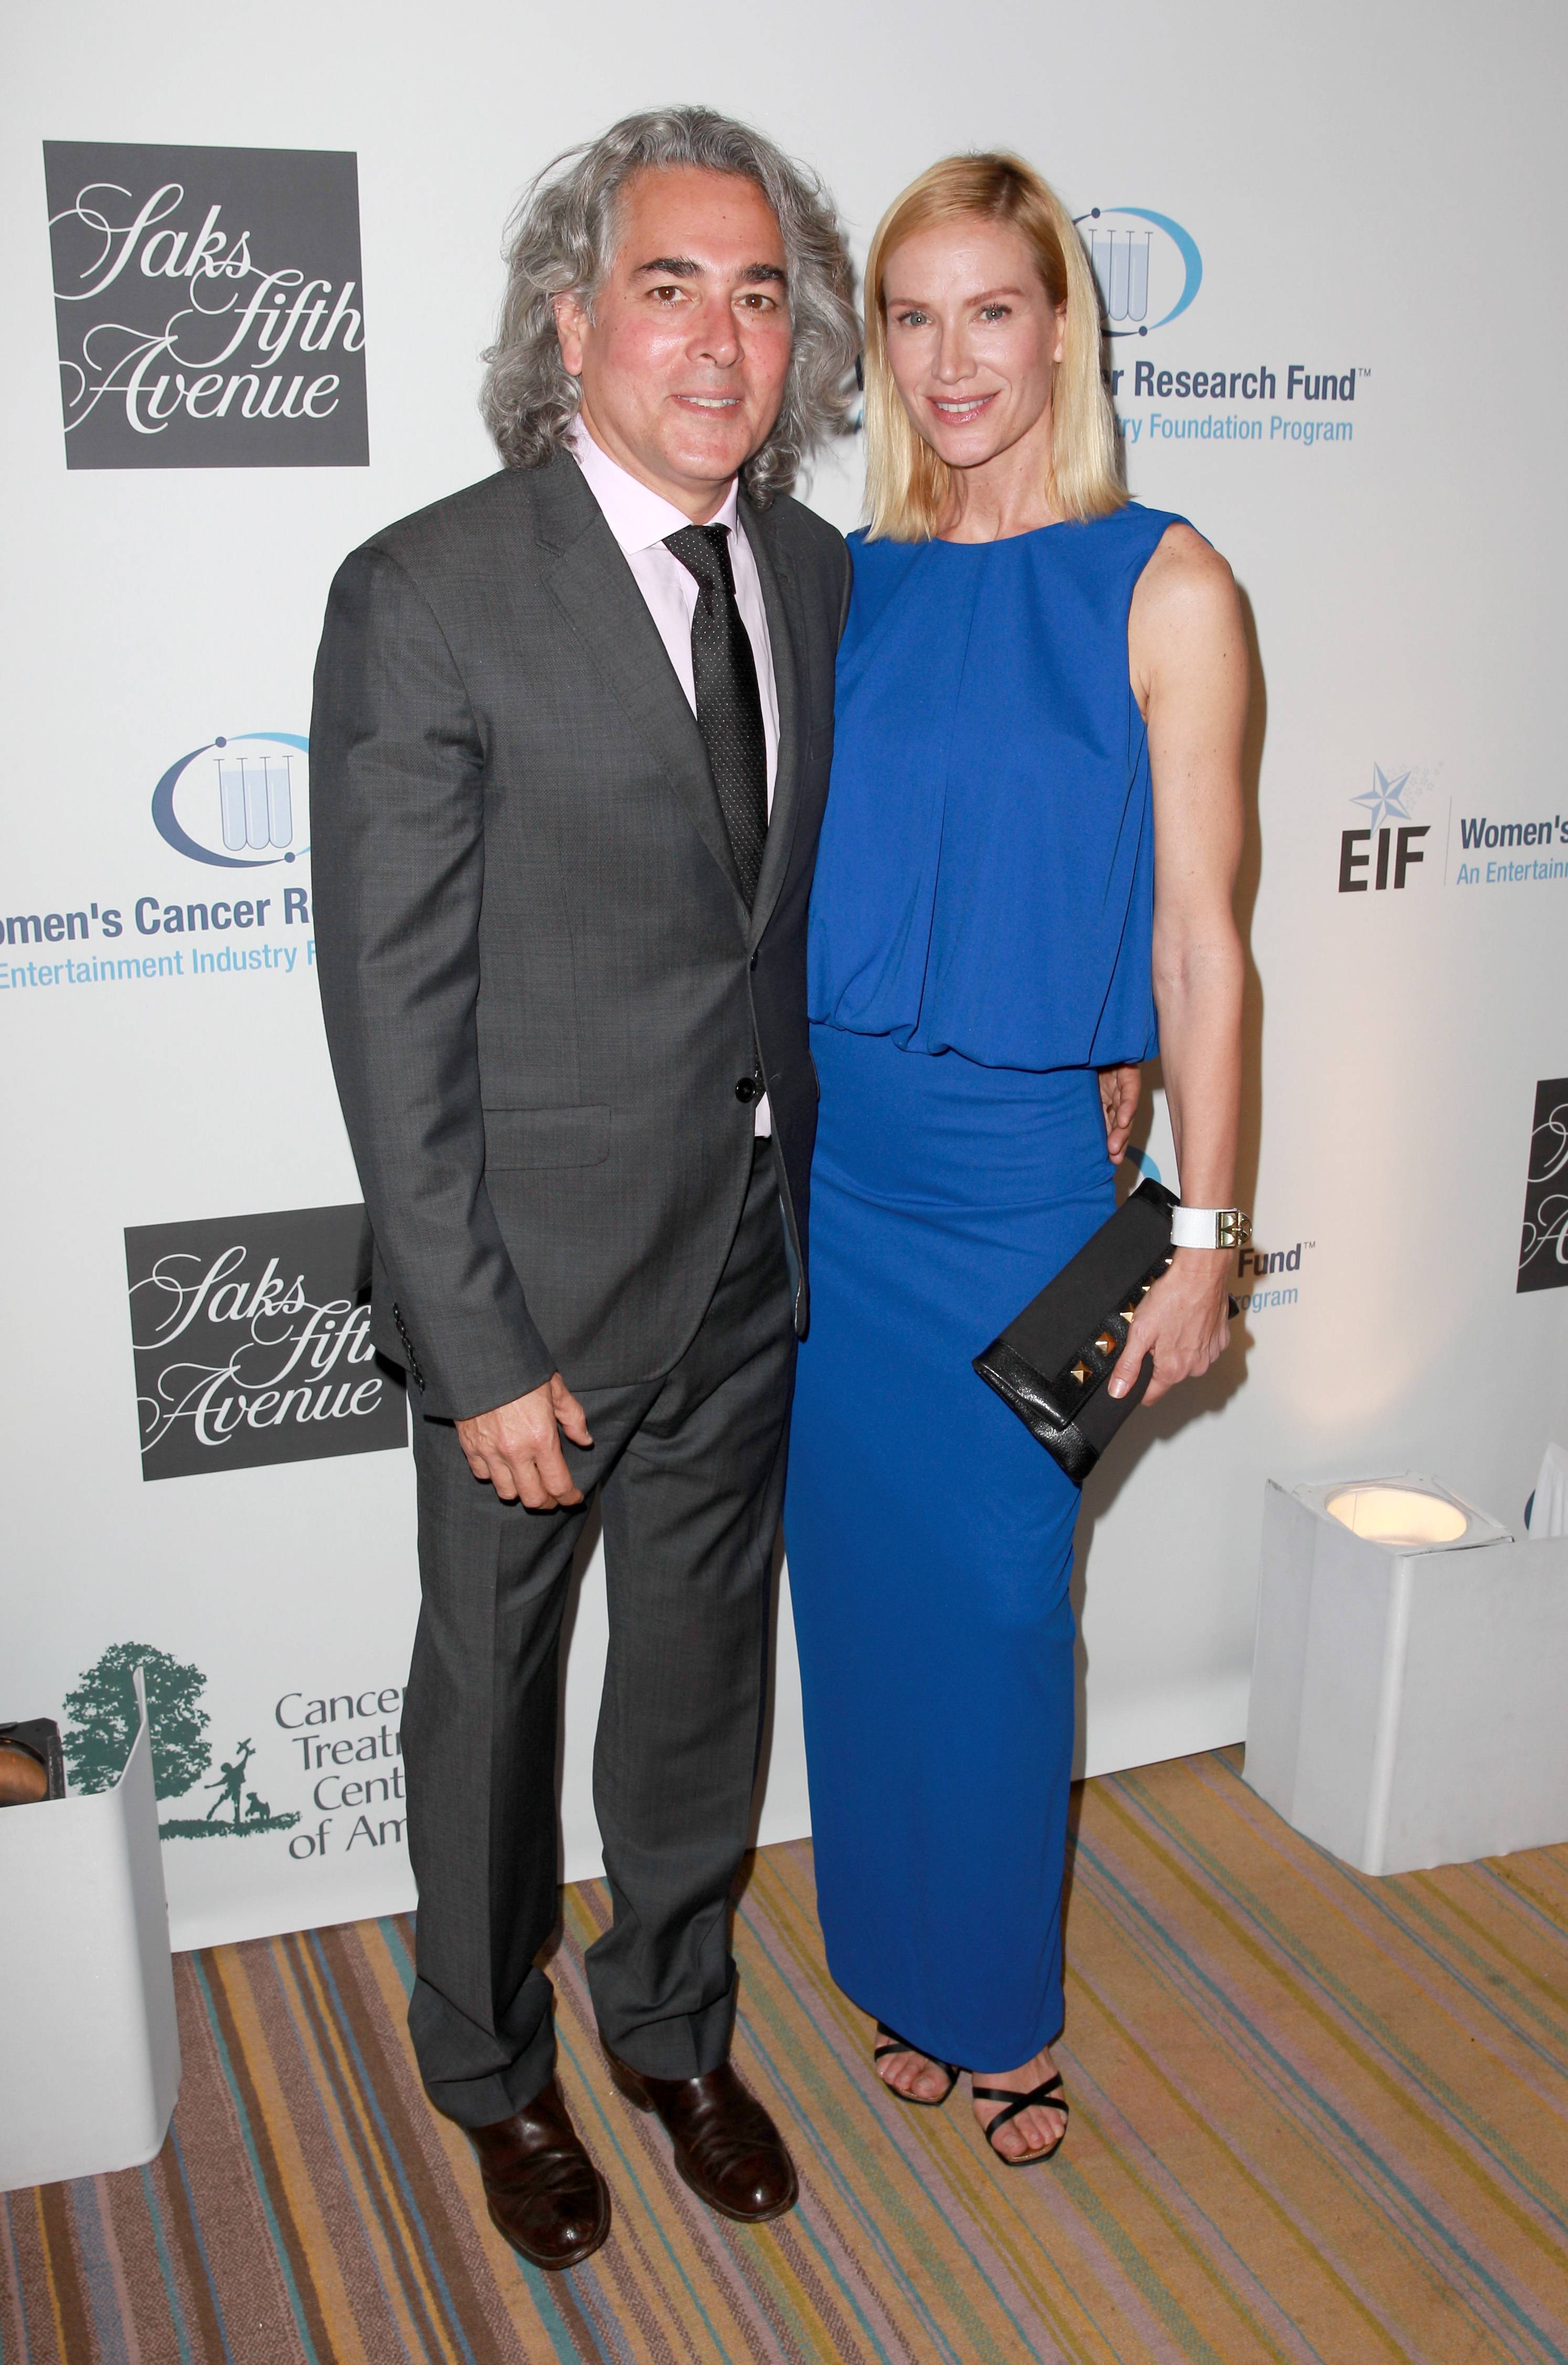 EIF Women's Cancer Research Fund's 16th Annual 